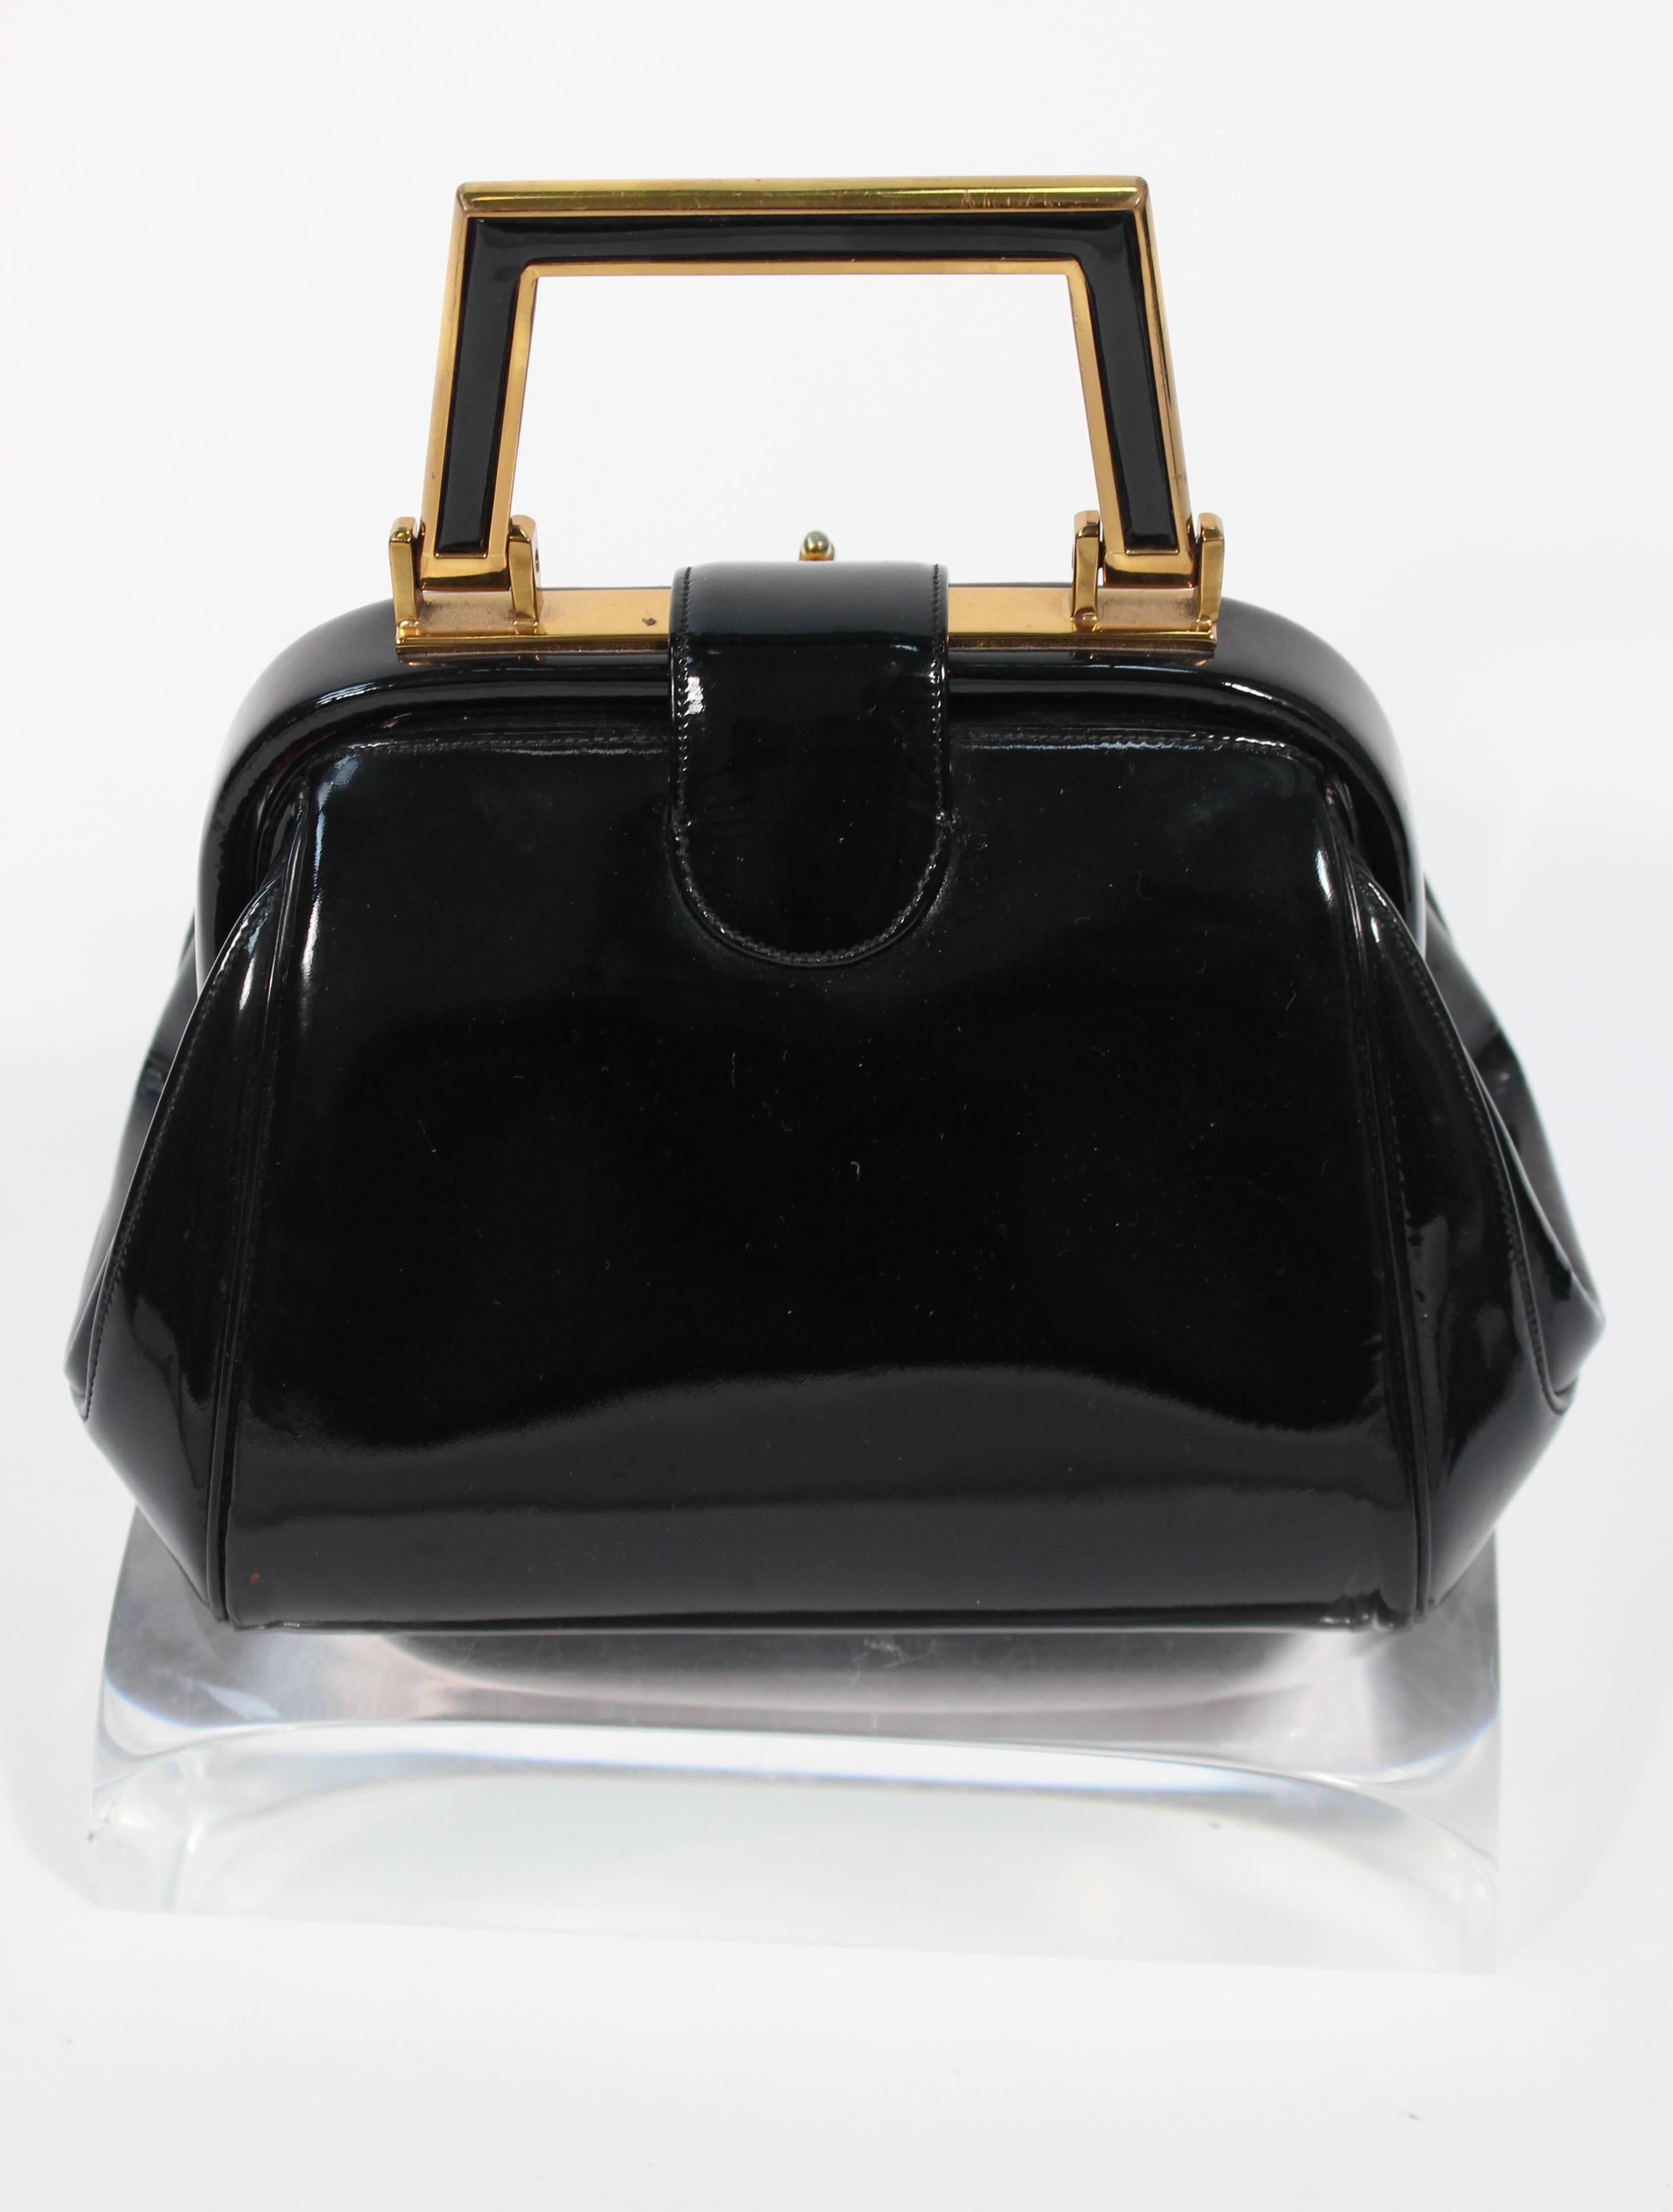 JUDITH LEIBER Vintage Rare 1960's Black and Gold Patent Leather Petite ...